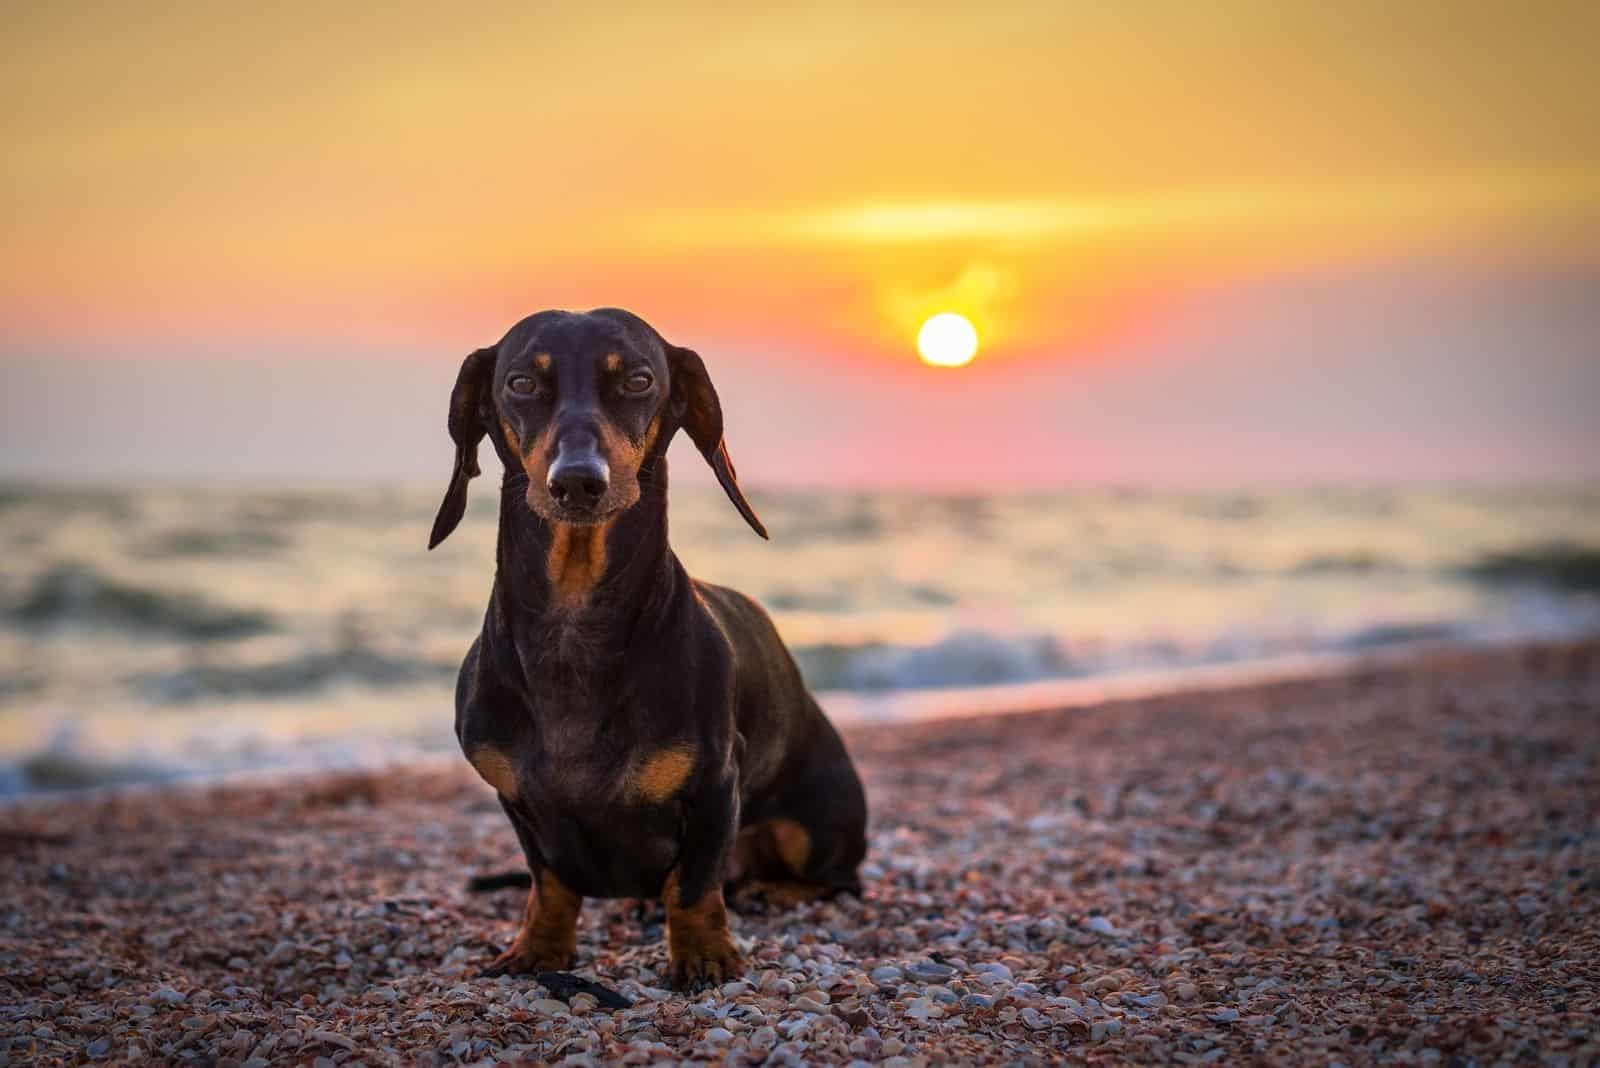 Dachshund Lifespan And Common Health Issues Explained